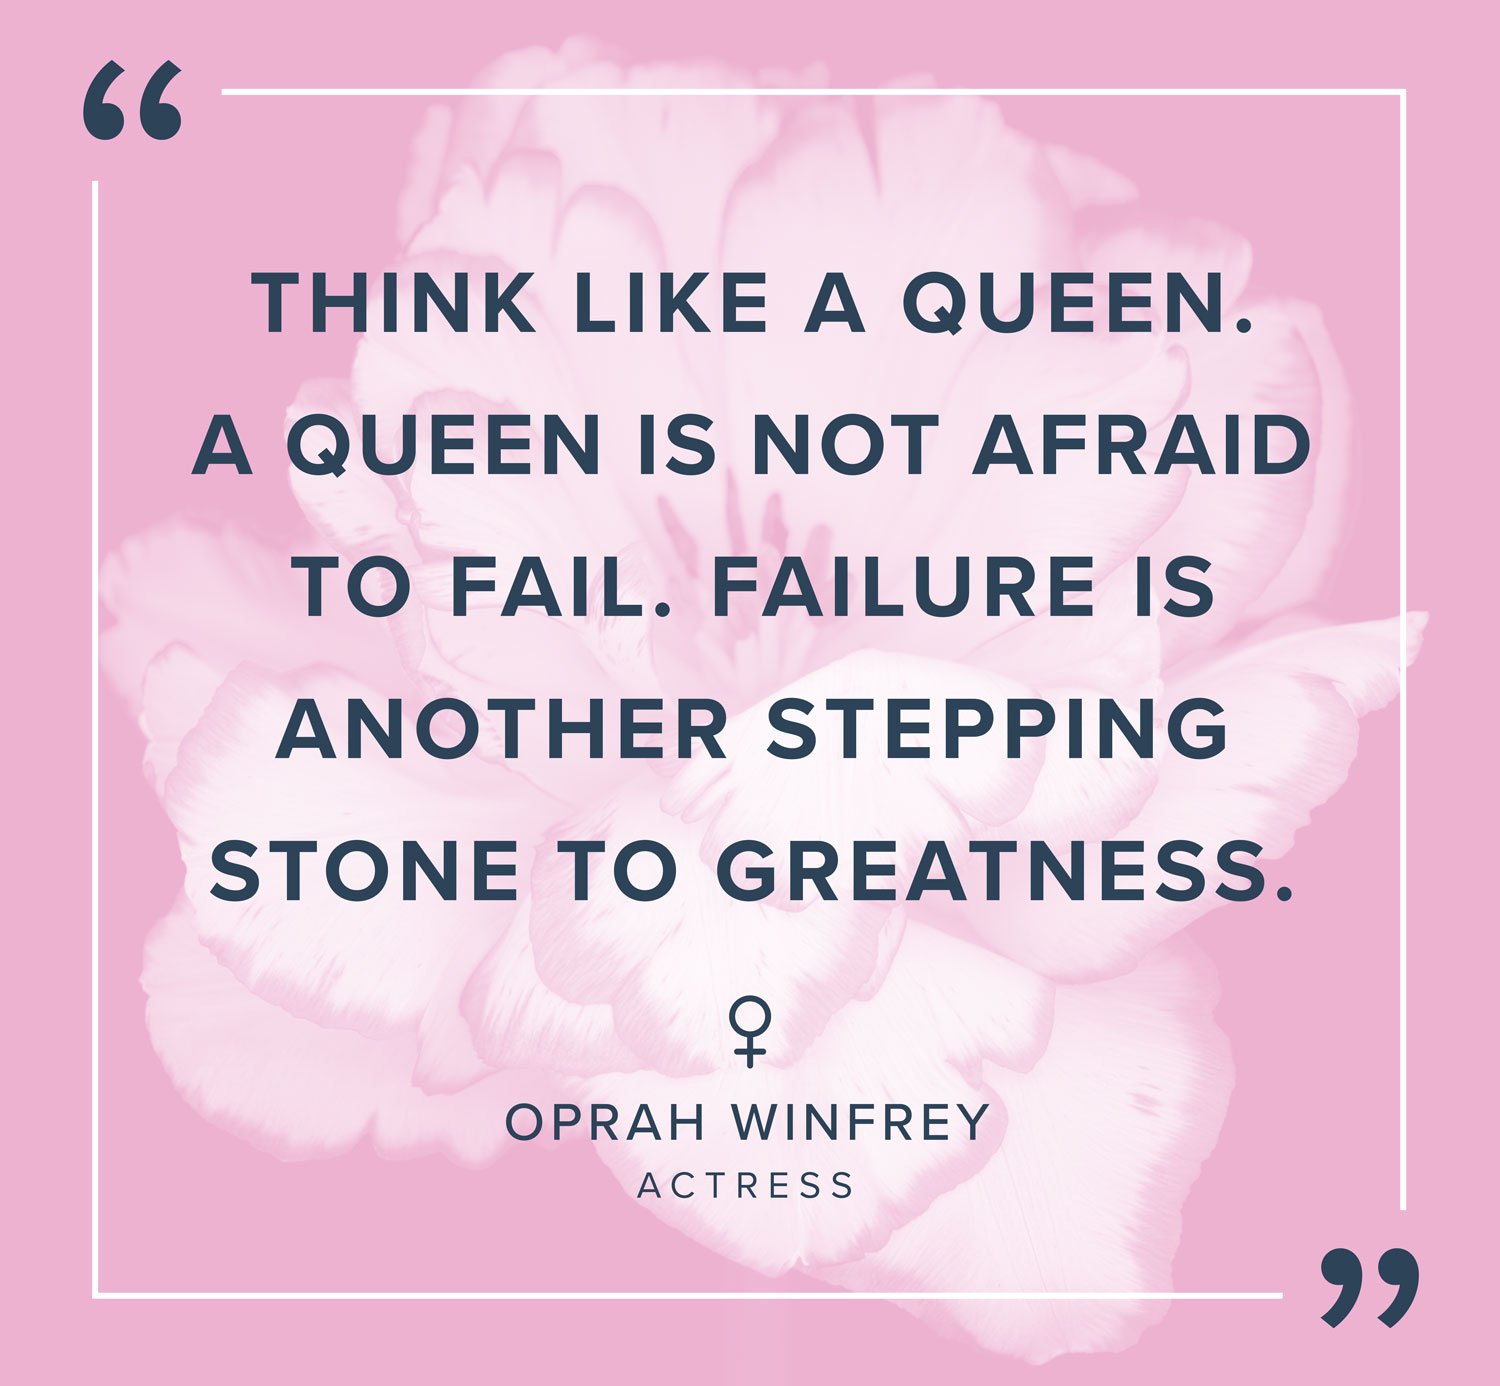 50+ Inspiring, Empowering Quotes for Women